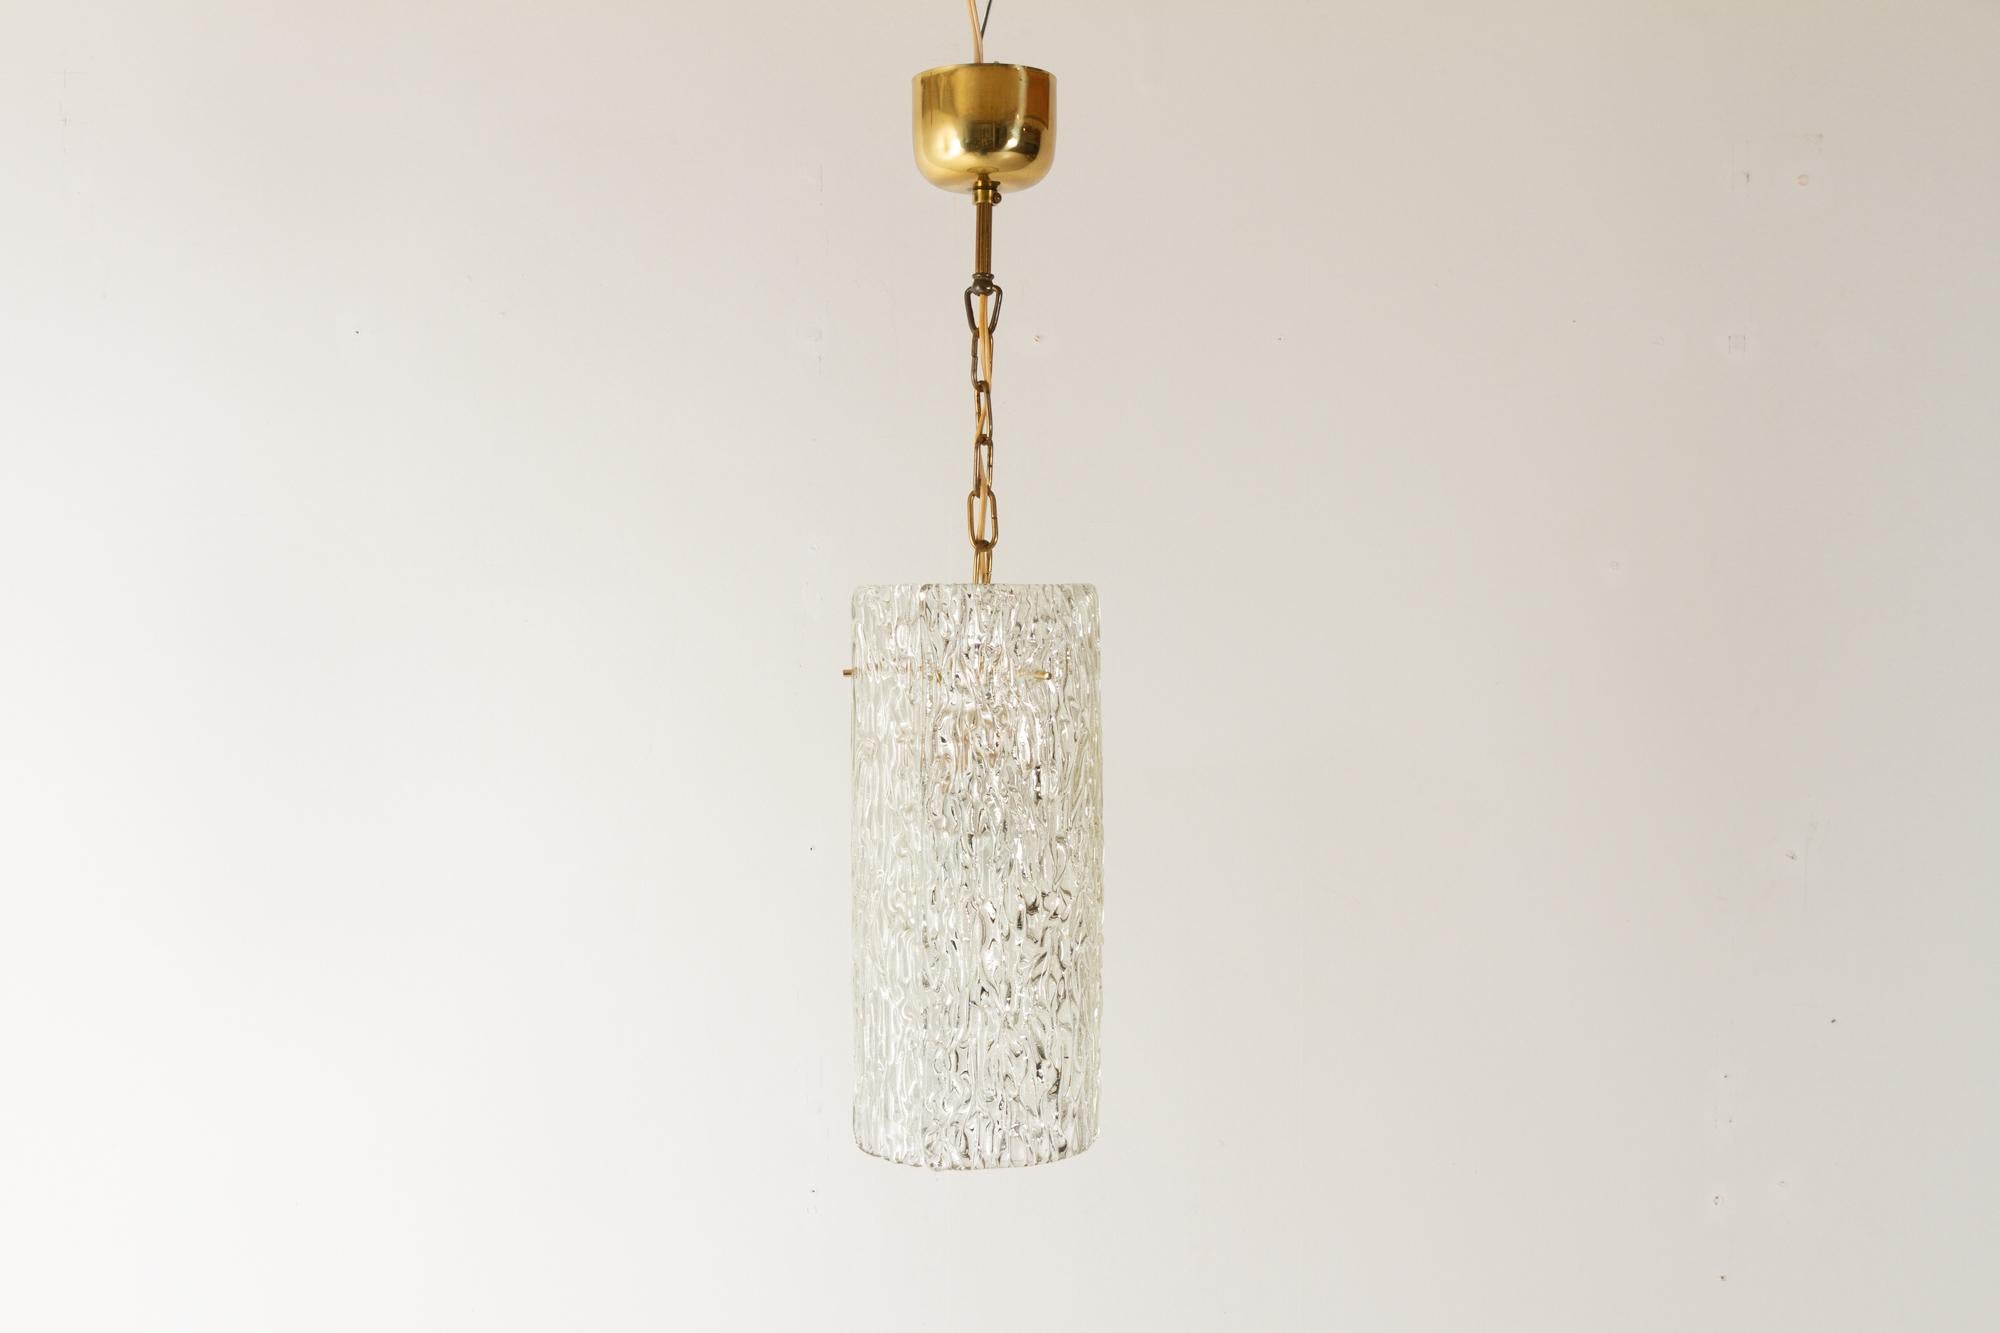 Scandinavian Modern Pendant by Carl Fagerlund for Orrefors 1960s
Vintage cylindrical ceiling lamp in crystal glass designed by Swedish designer Carl Fagerlund for Orrefors, Sweden.
Large crystal glass cylinder suspended in a brass chain. Very